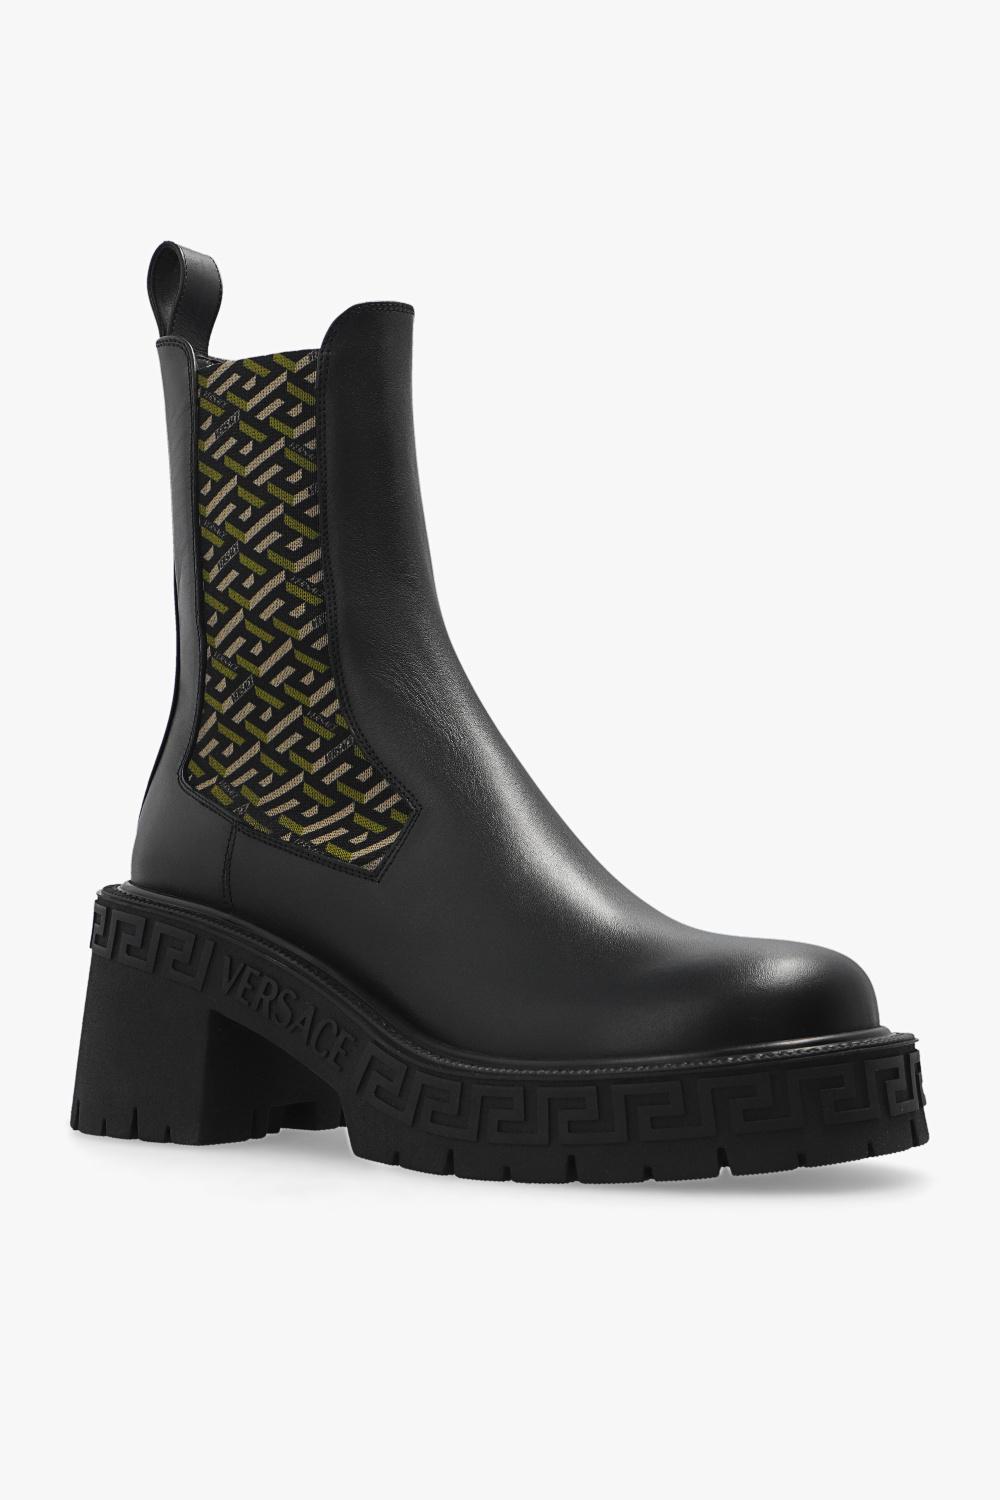 Versace Heeled Chelsea Boots in Black | Lyst